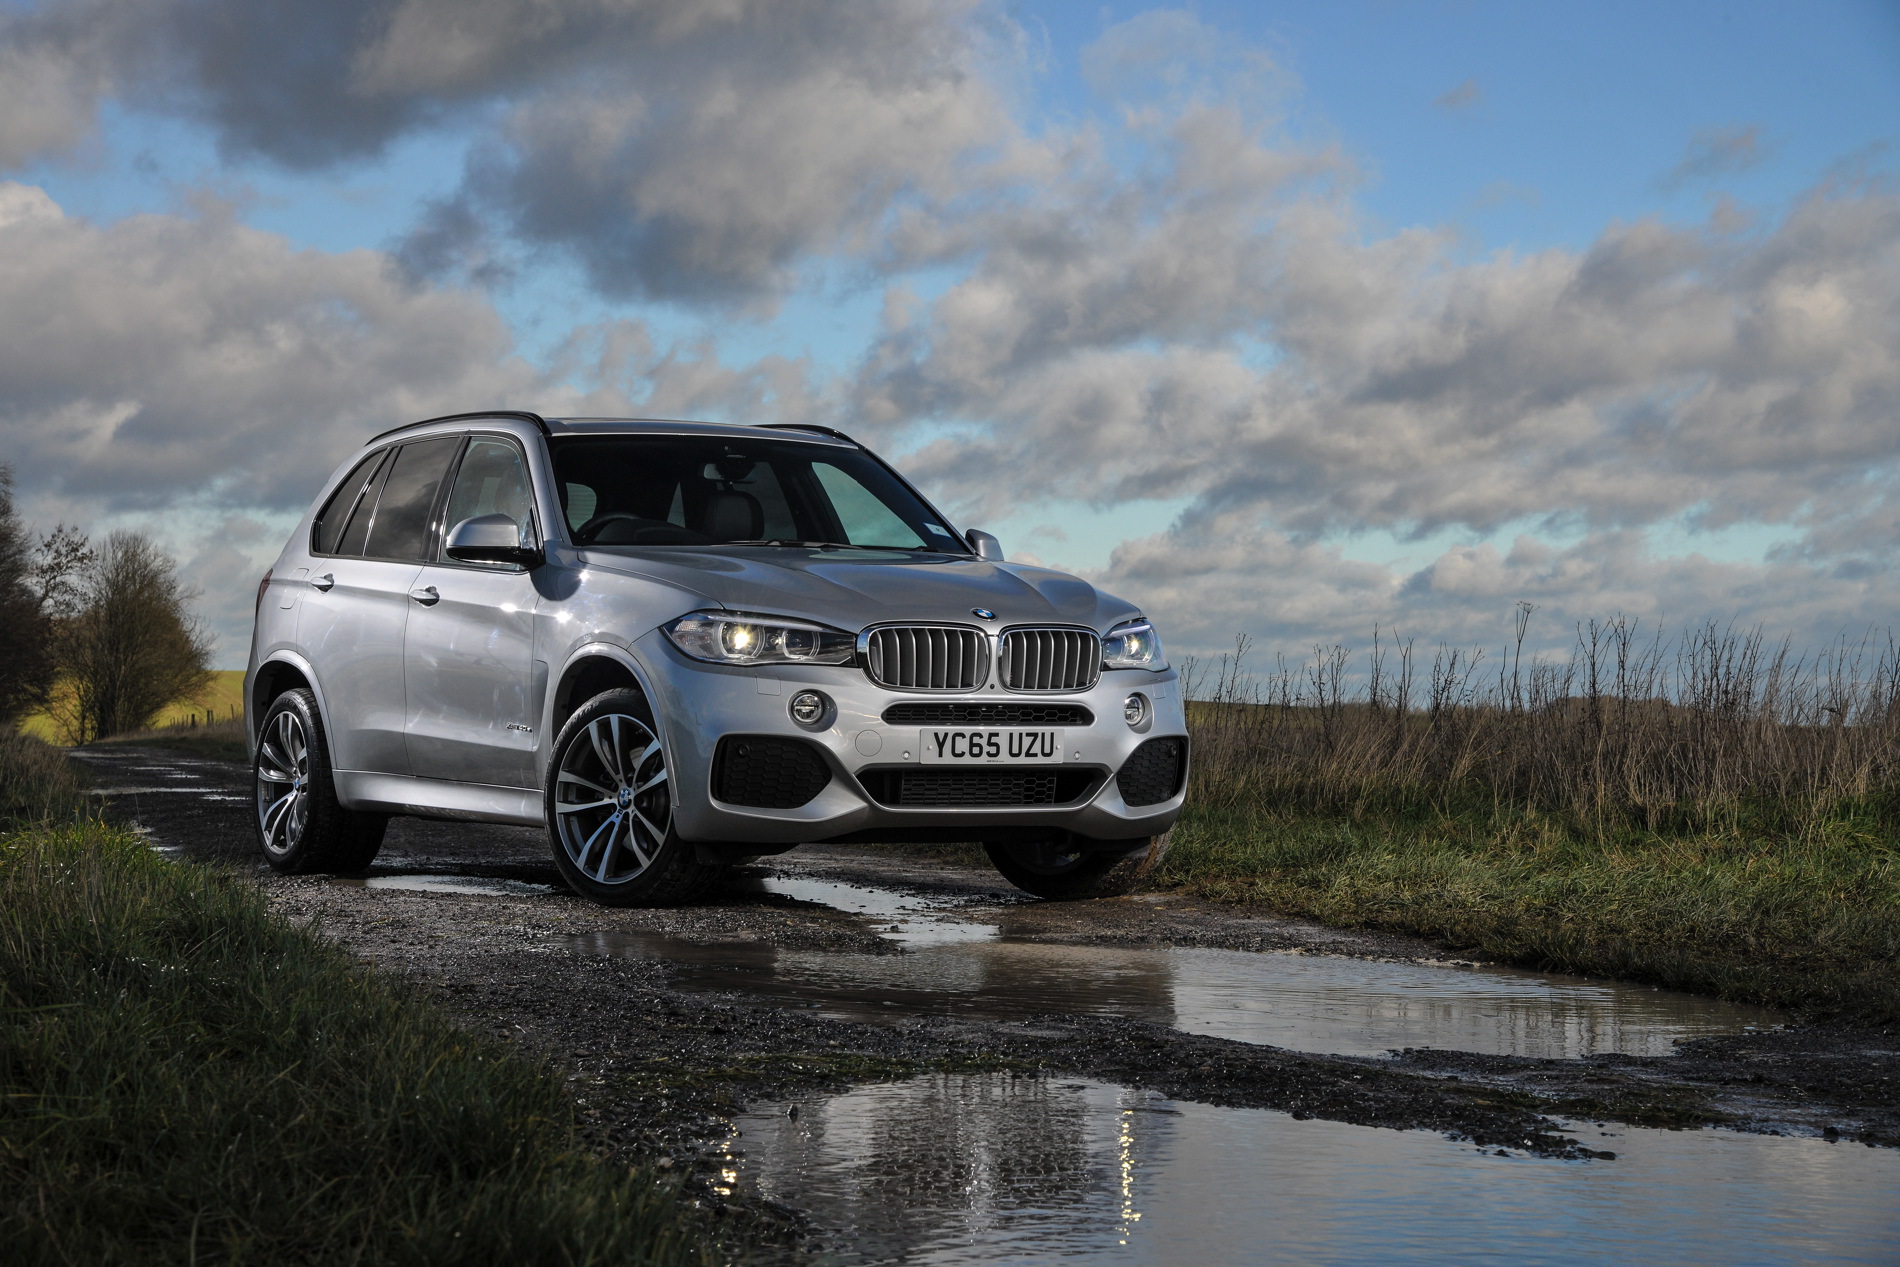 What are the features of the BMW X5?